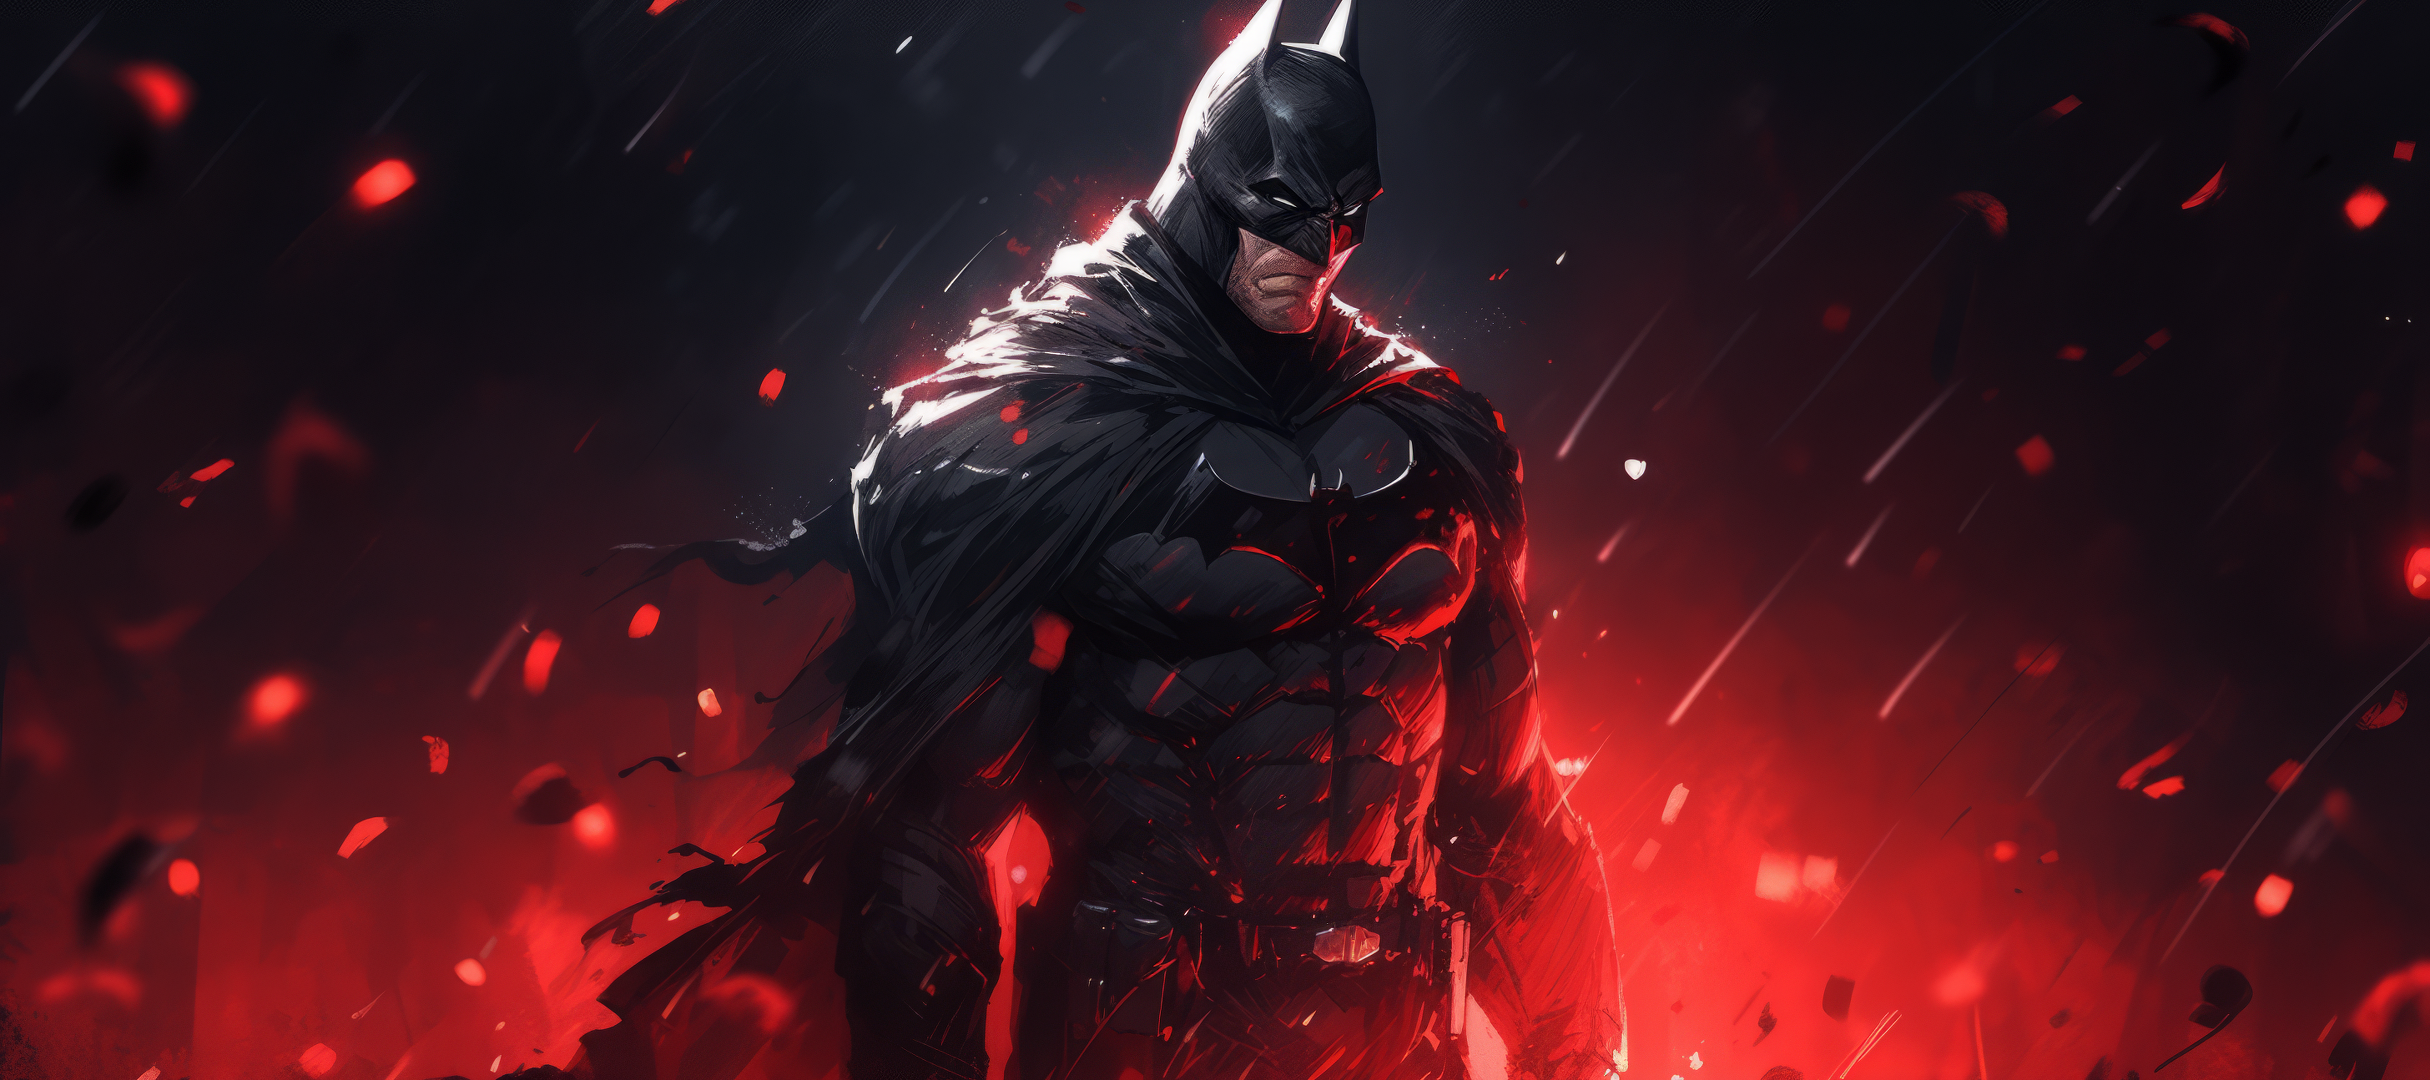 4100+ Batman HD Wallpapers and Backgrounds